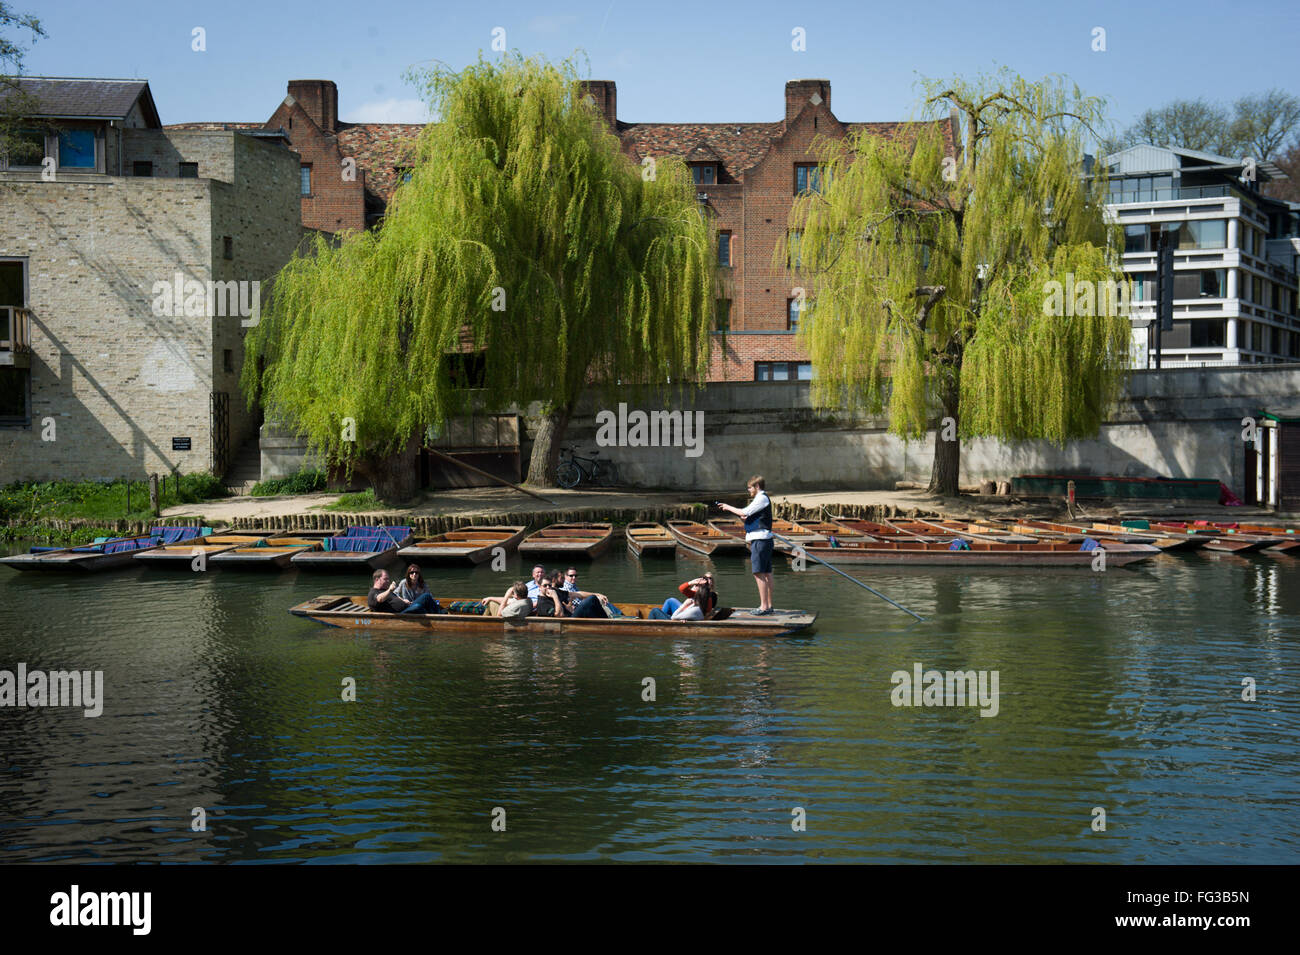 Punting in the University town of Cambridge, England UK Stock Photo